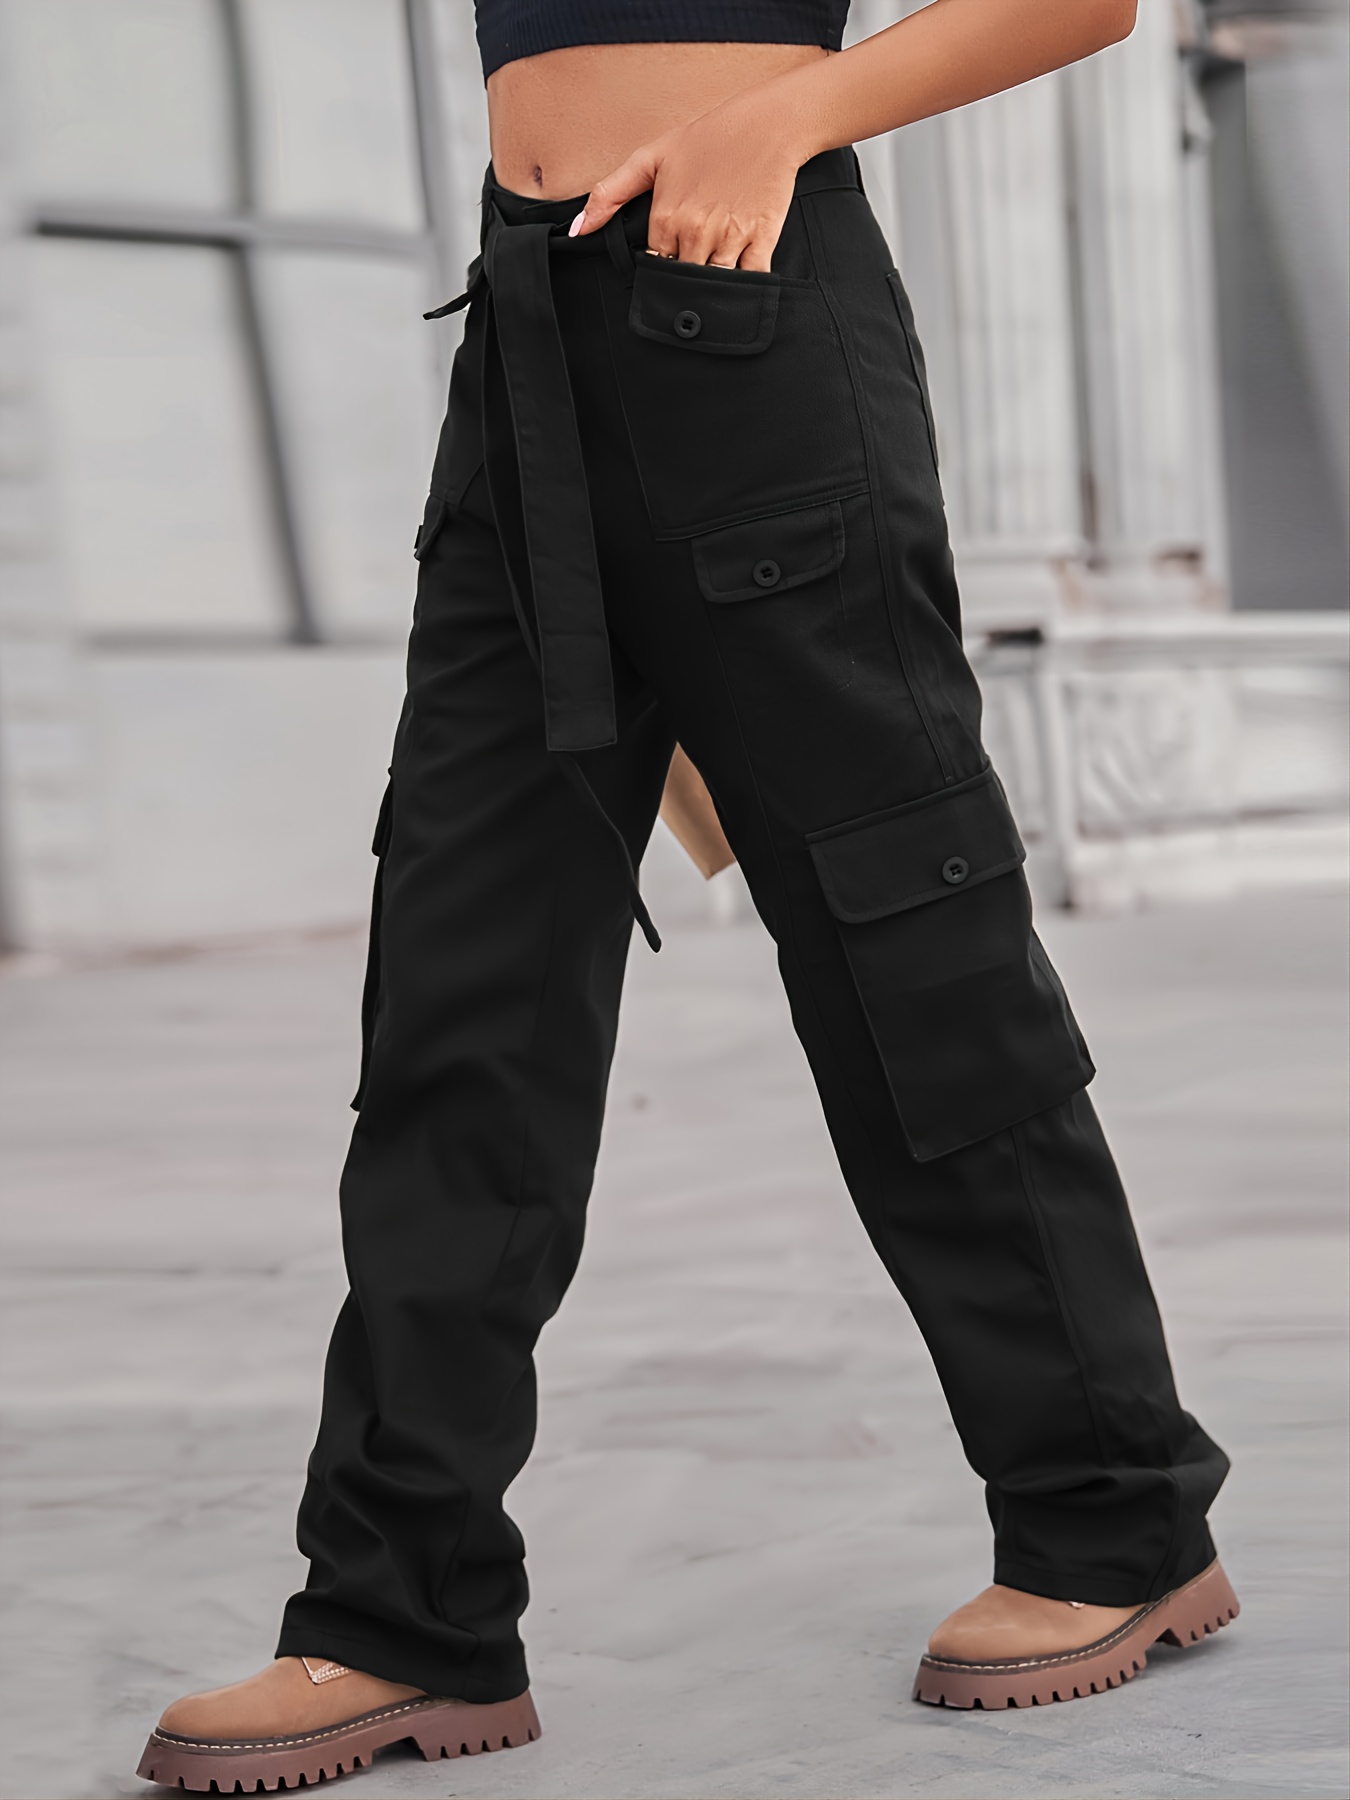 Multi-Pocket Baggy Cargo Pants, Loose Fit Non-Stretch With Belt ...